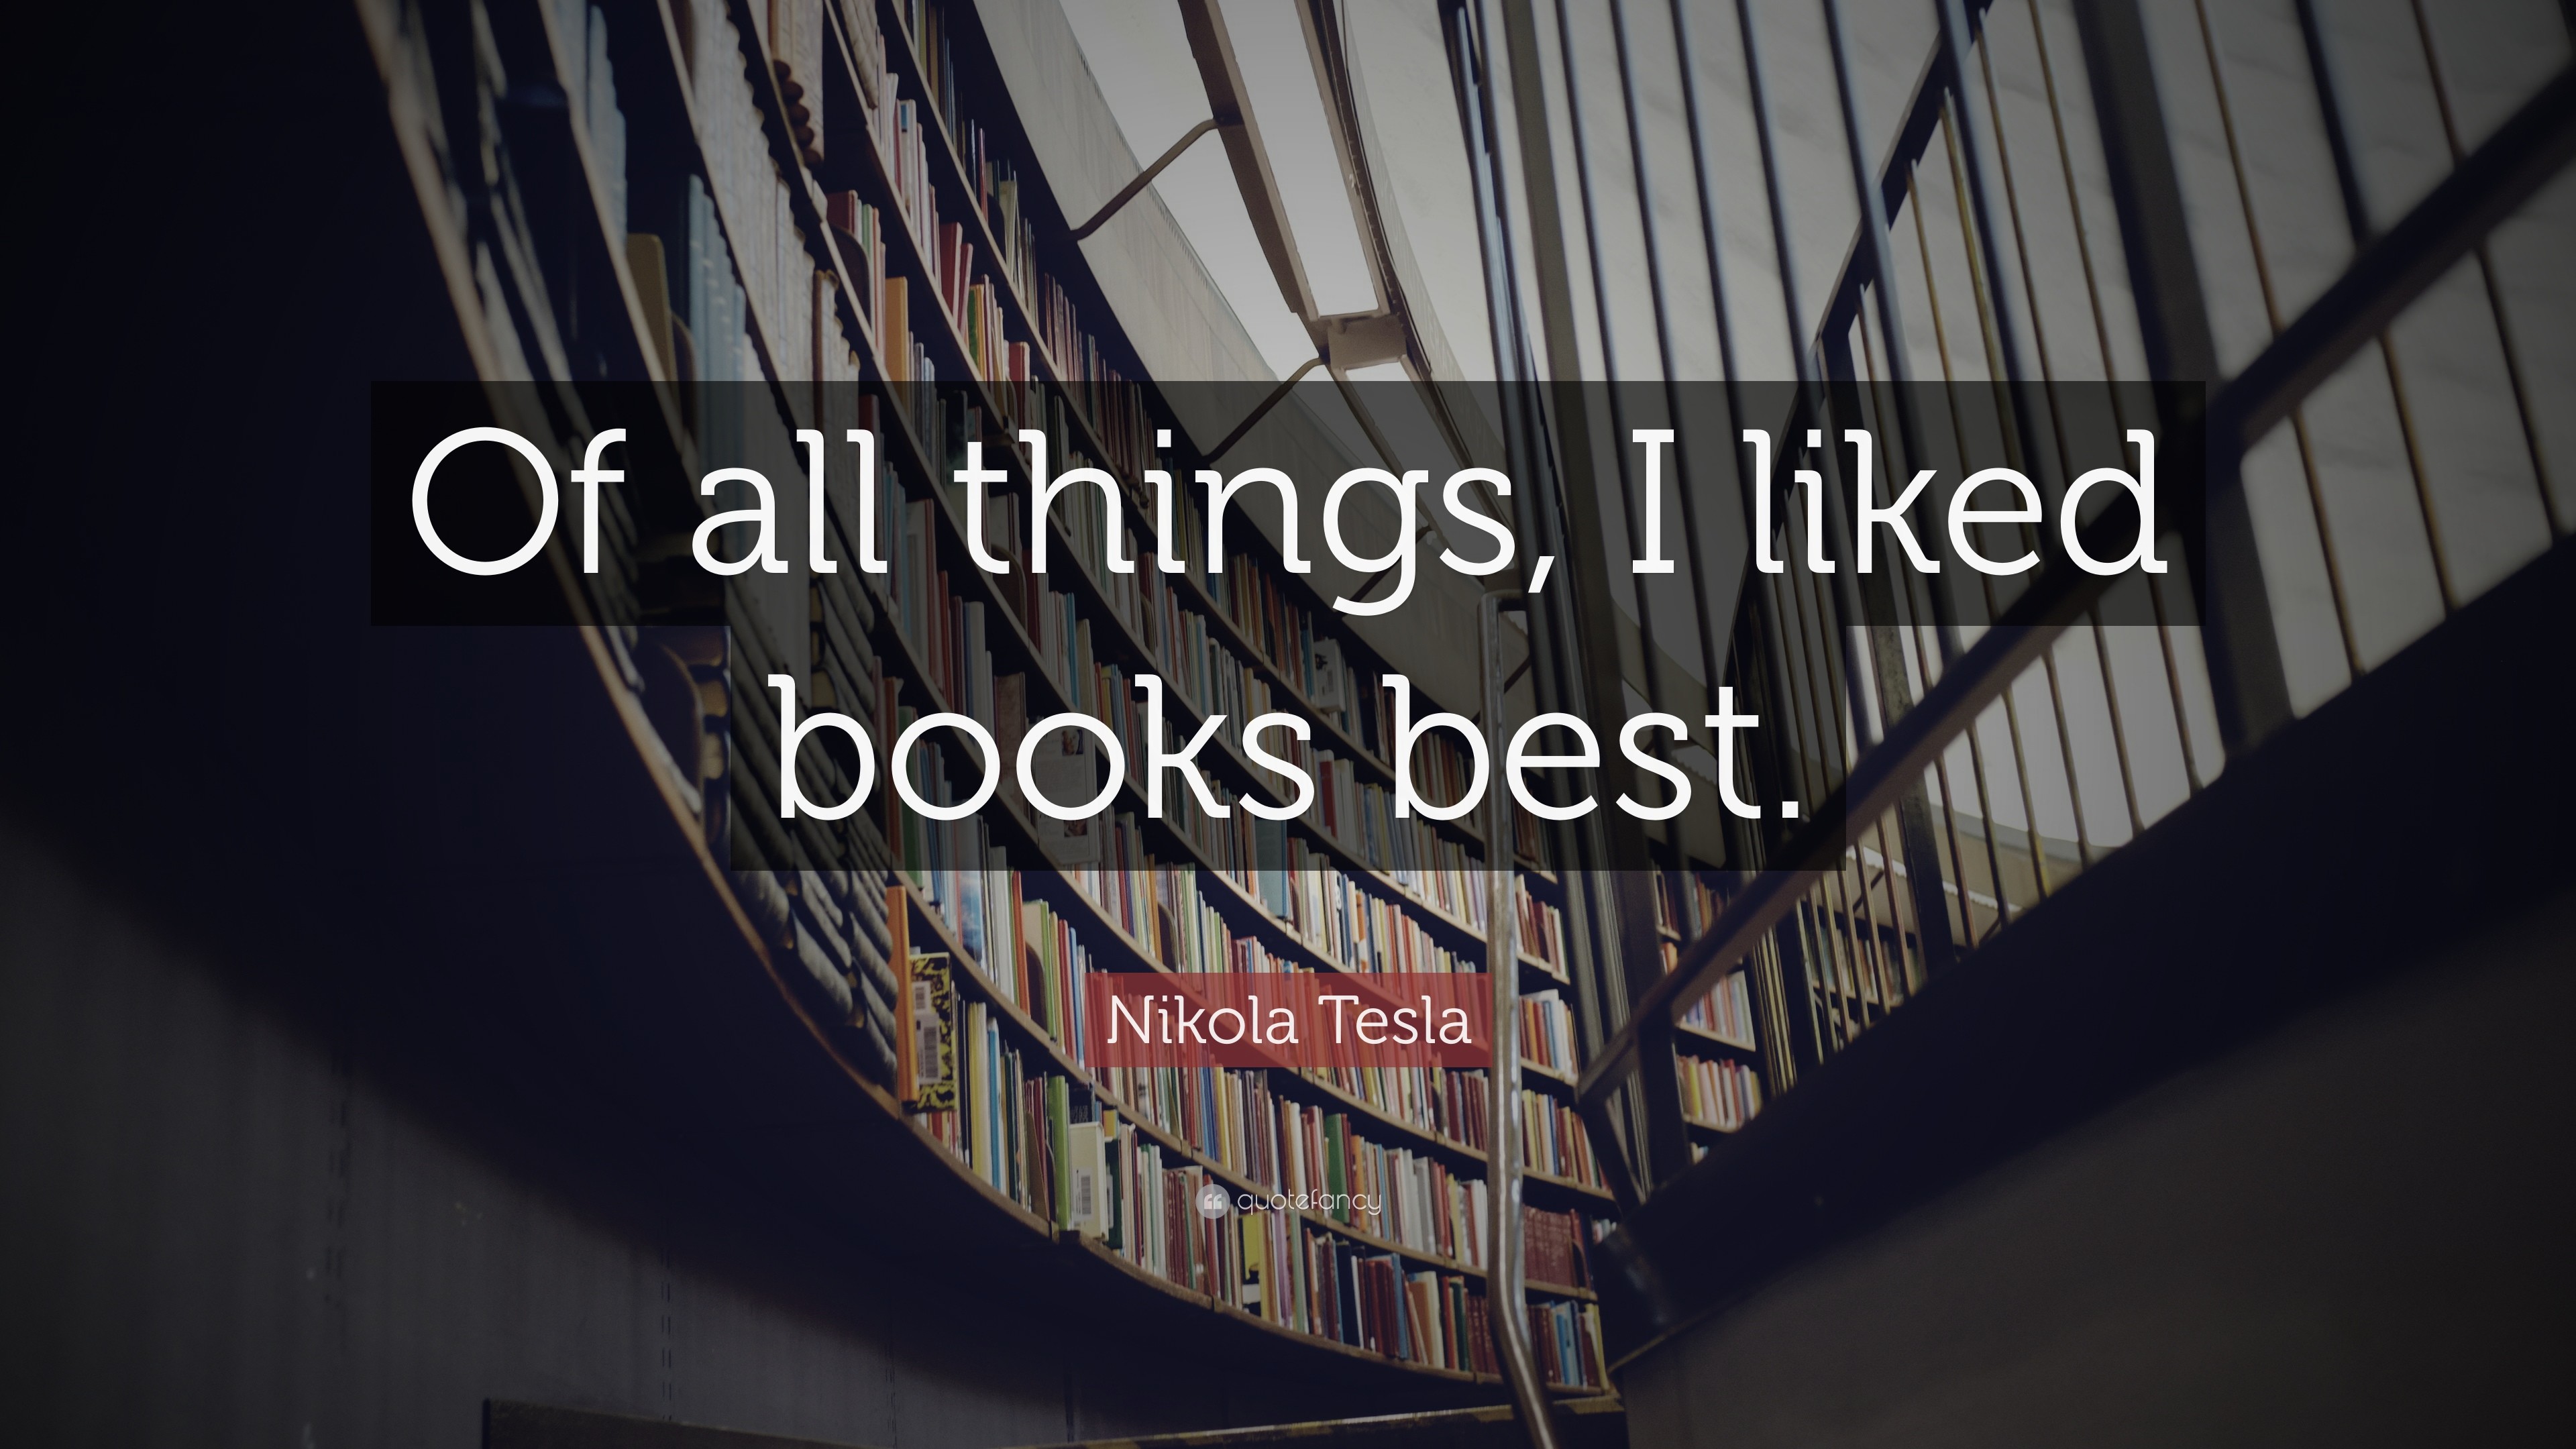 3840x2160 Nikola Tesla Quote: “Of all things, I liked books best.”